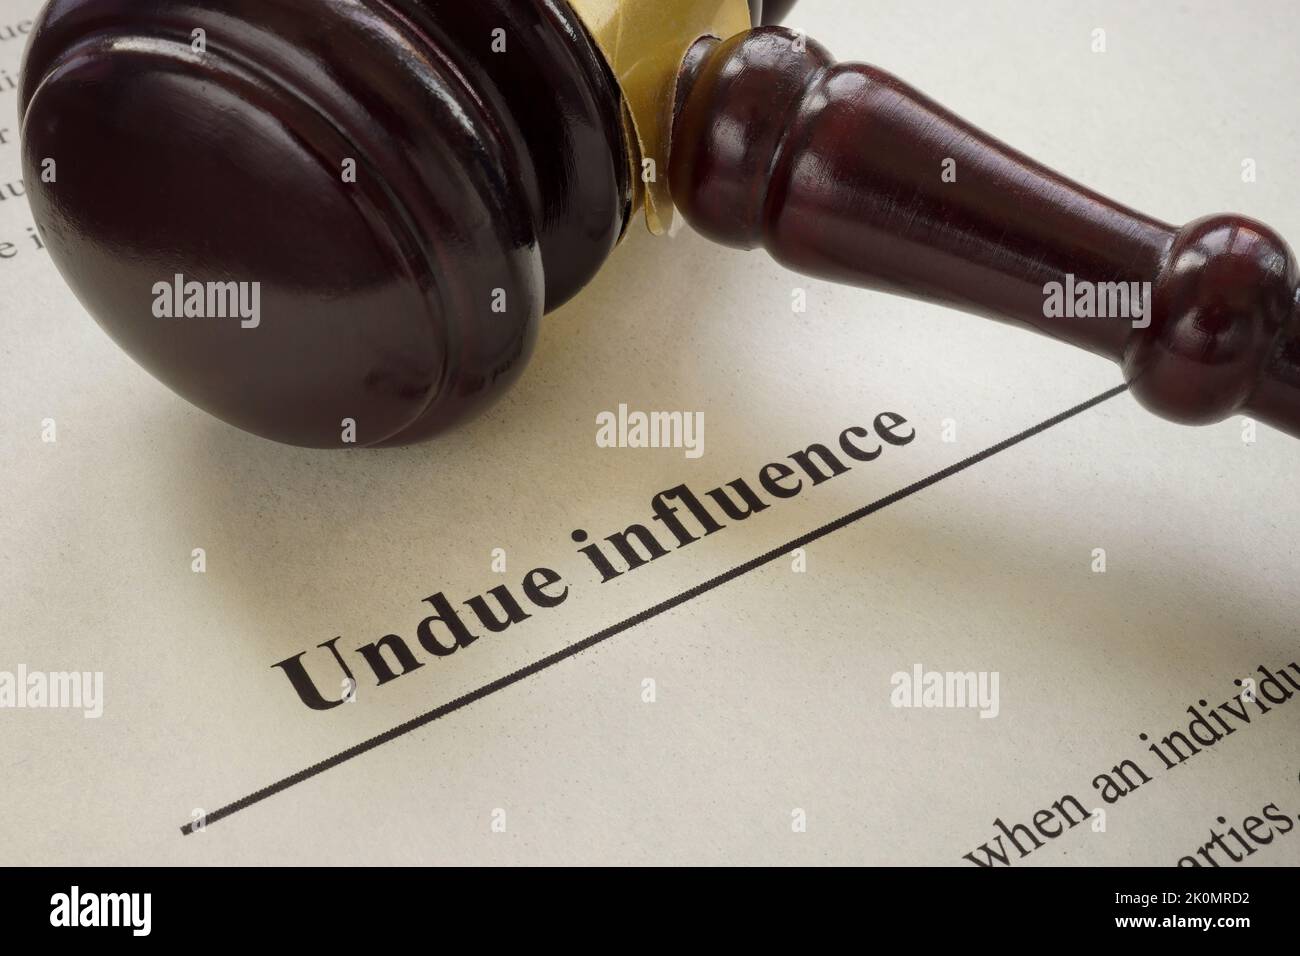 Info about undue influence and gavel near. Stock Photo